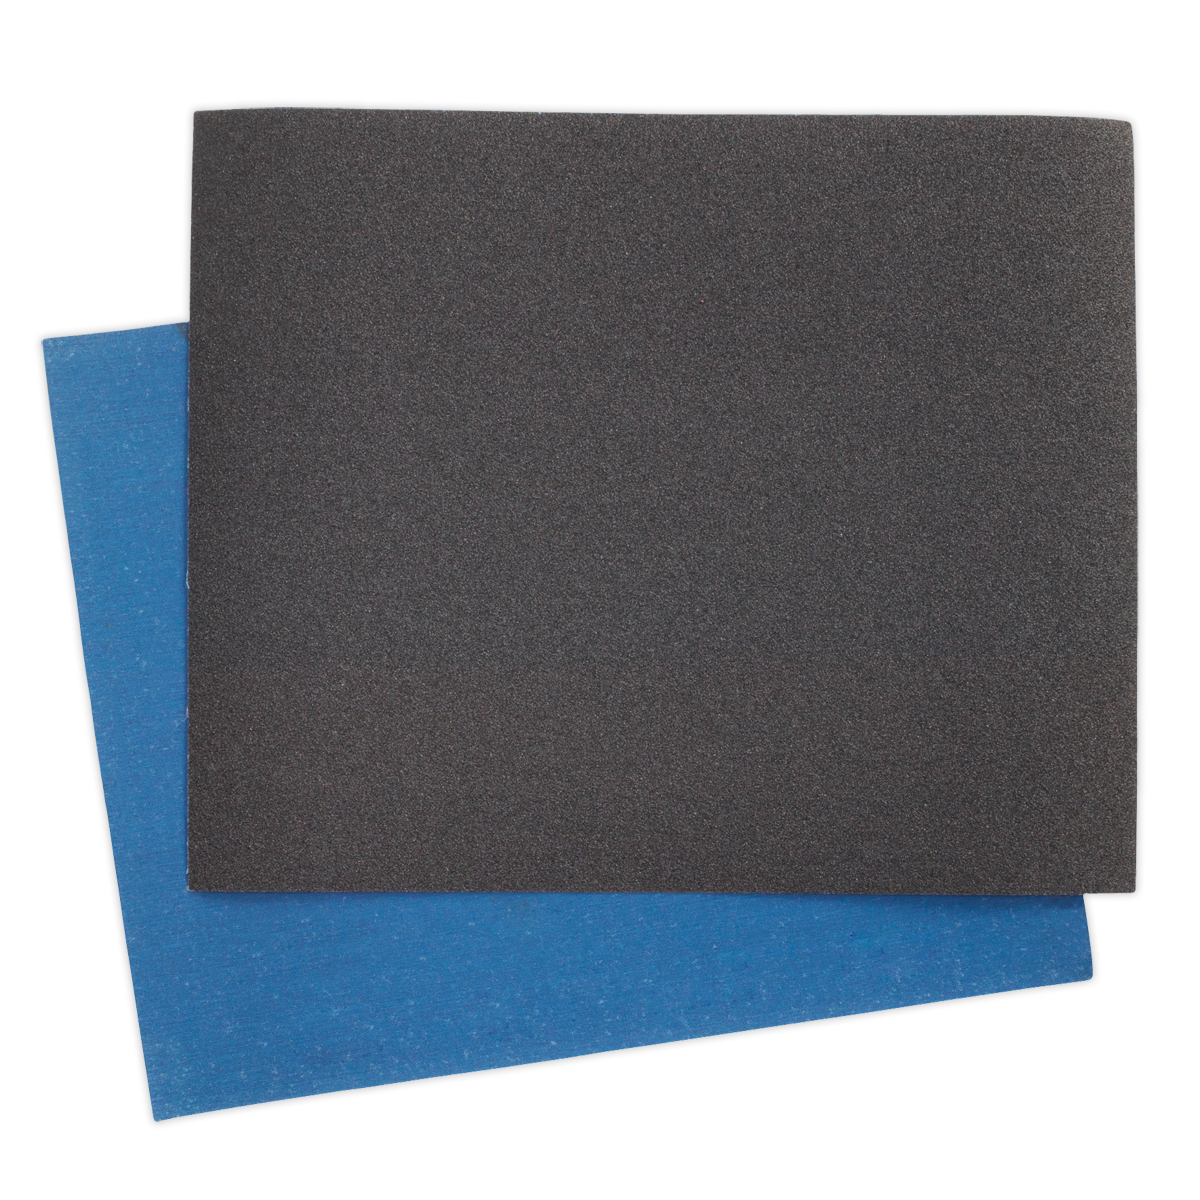 Sealey Emery Sheet Blue Twill 230 x 280mm 60Grit Pack of 25